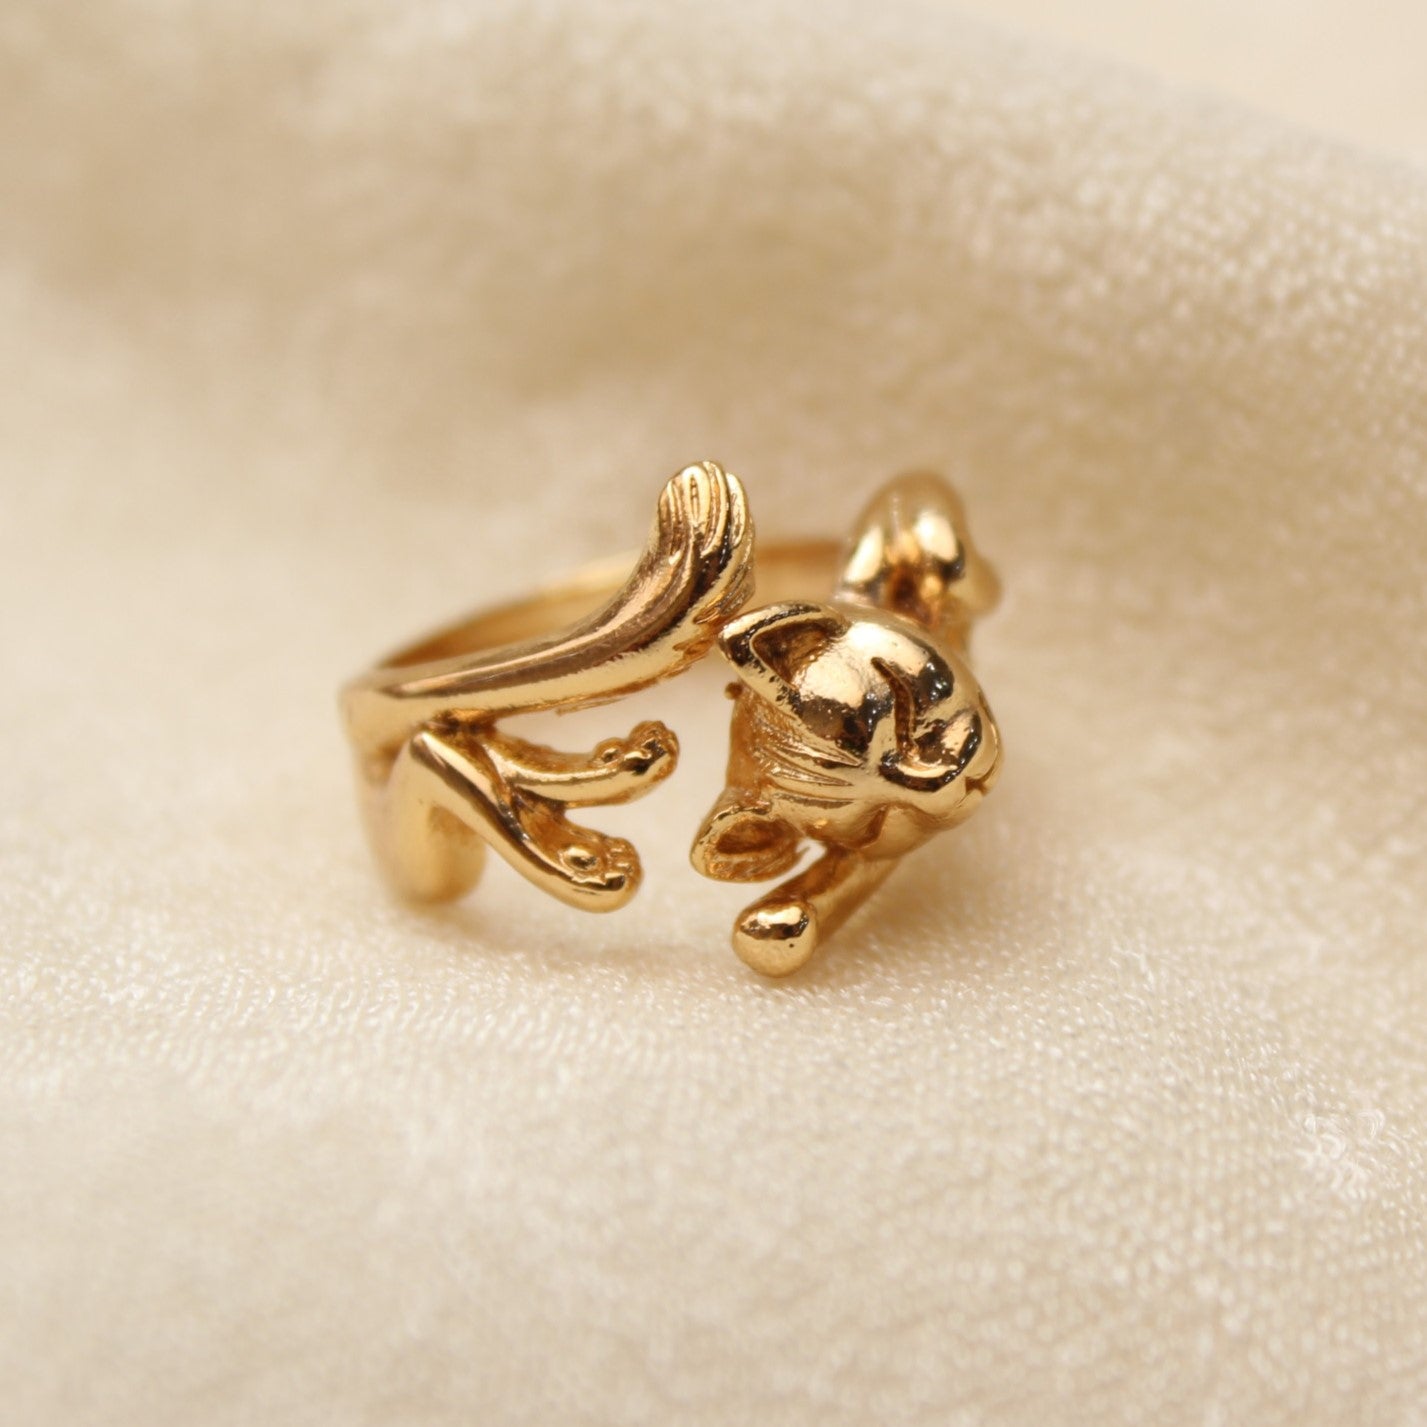 TFC 24K Kitty Cat Gold Plated Adjustable Ring